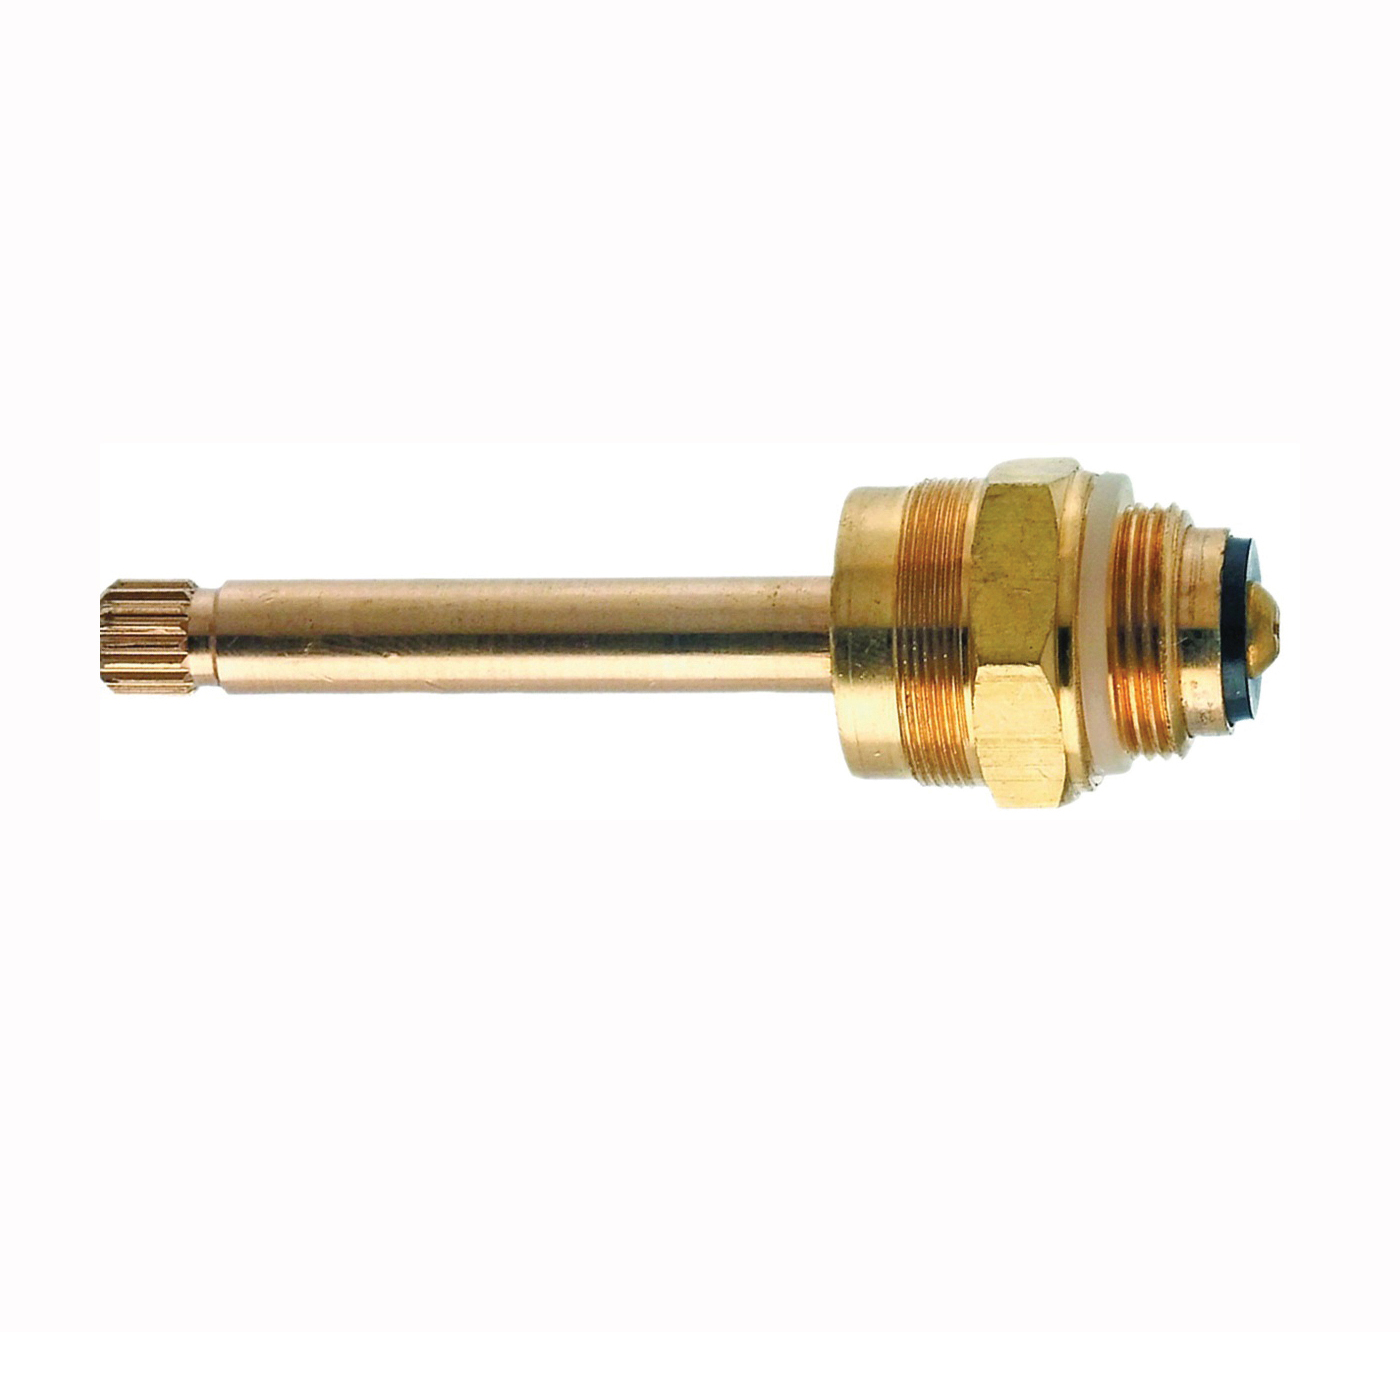 15526B Faucet Stem, Brass, 3-23/32 in L, For: Indiana Brass Two Handle Bath Faucets